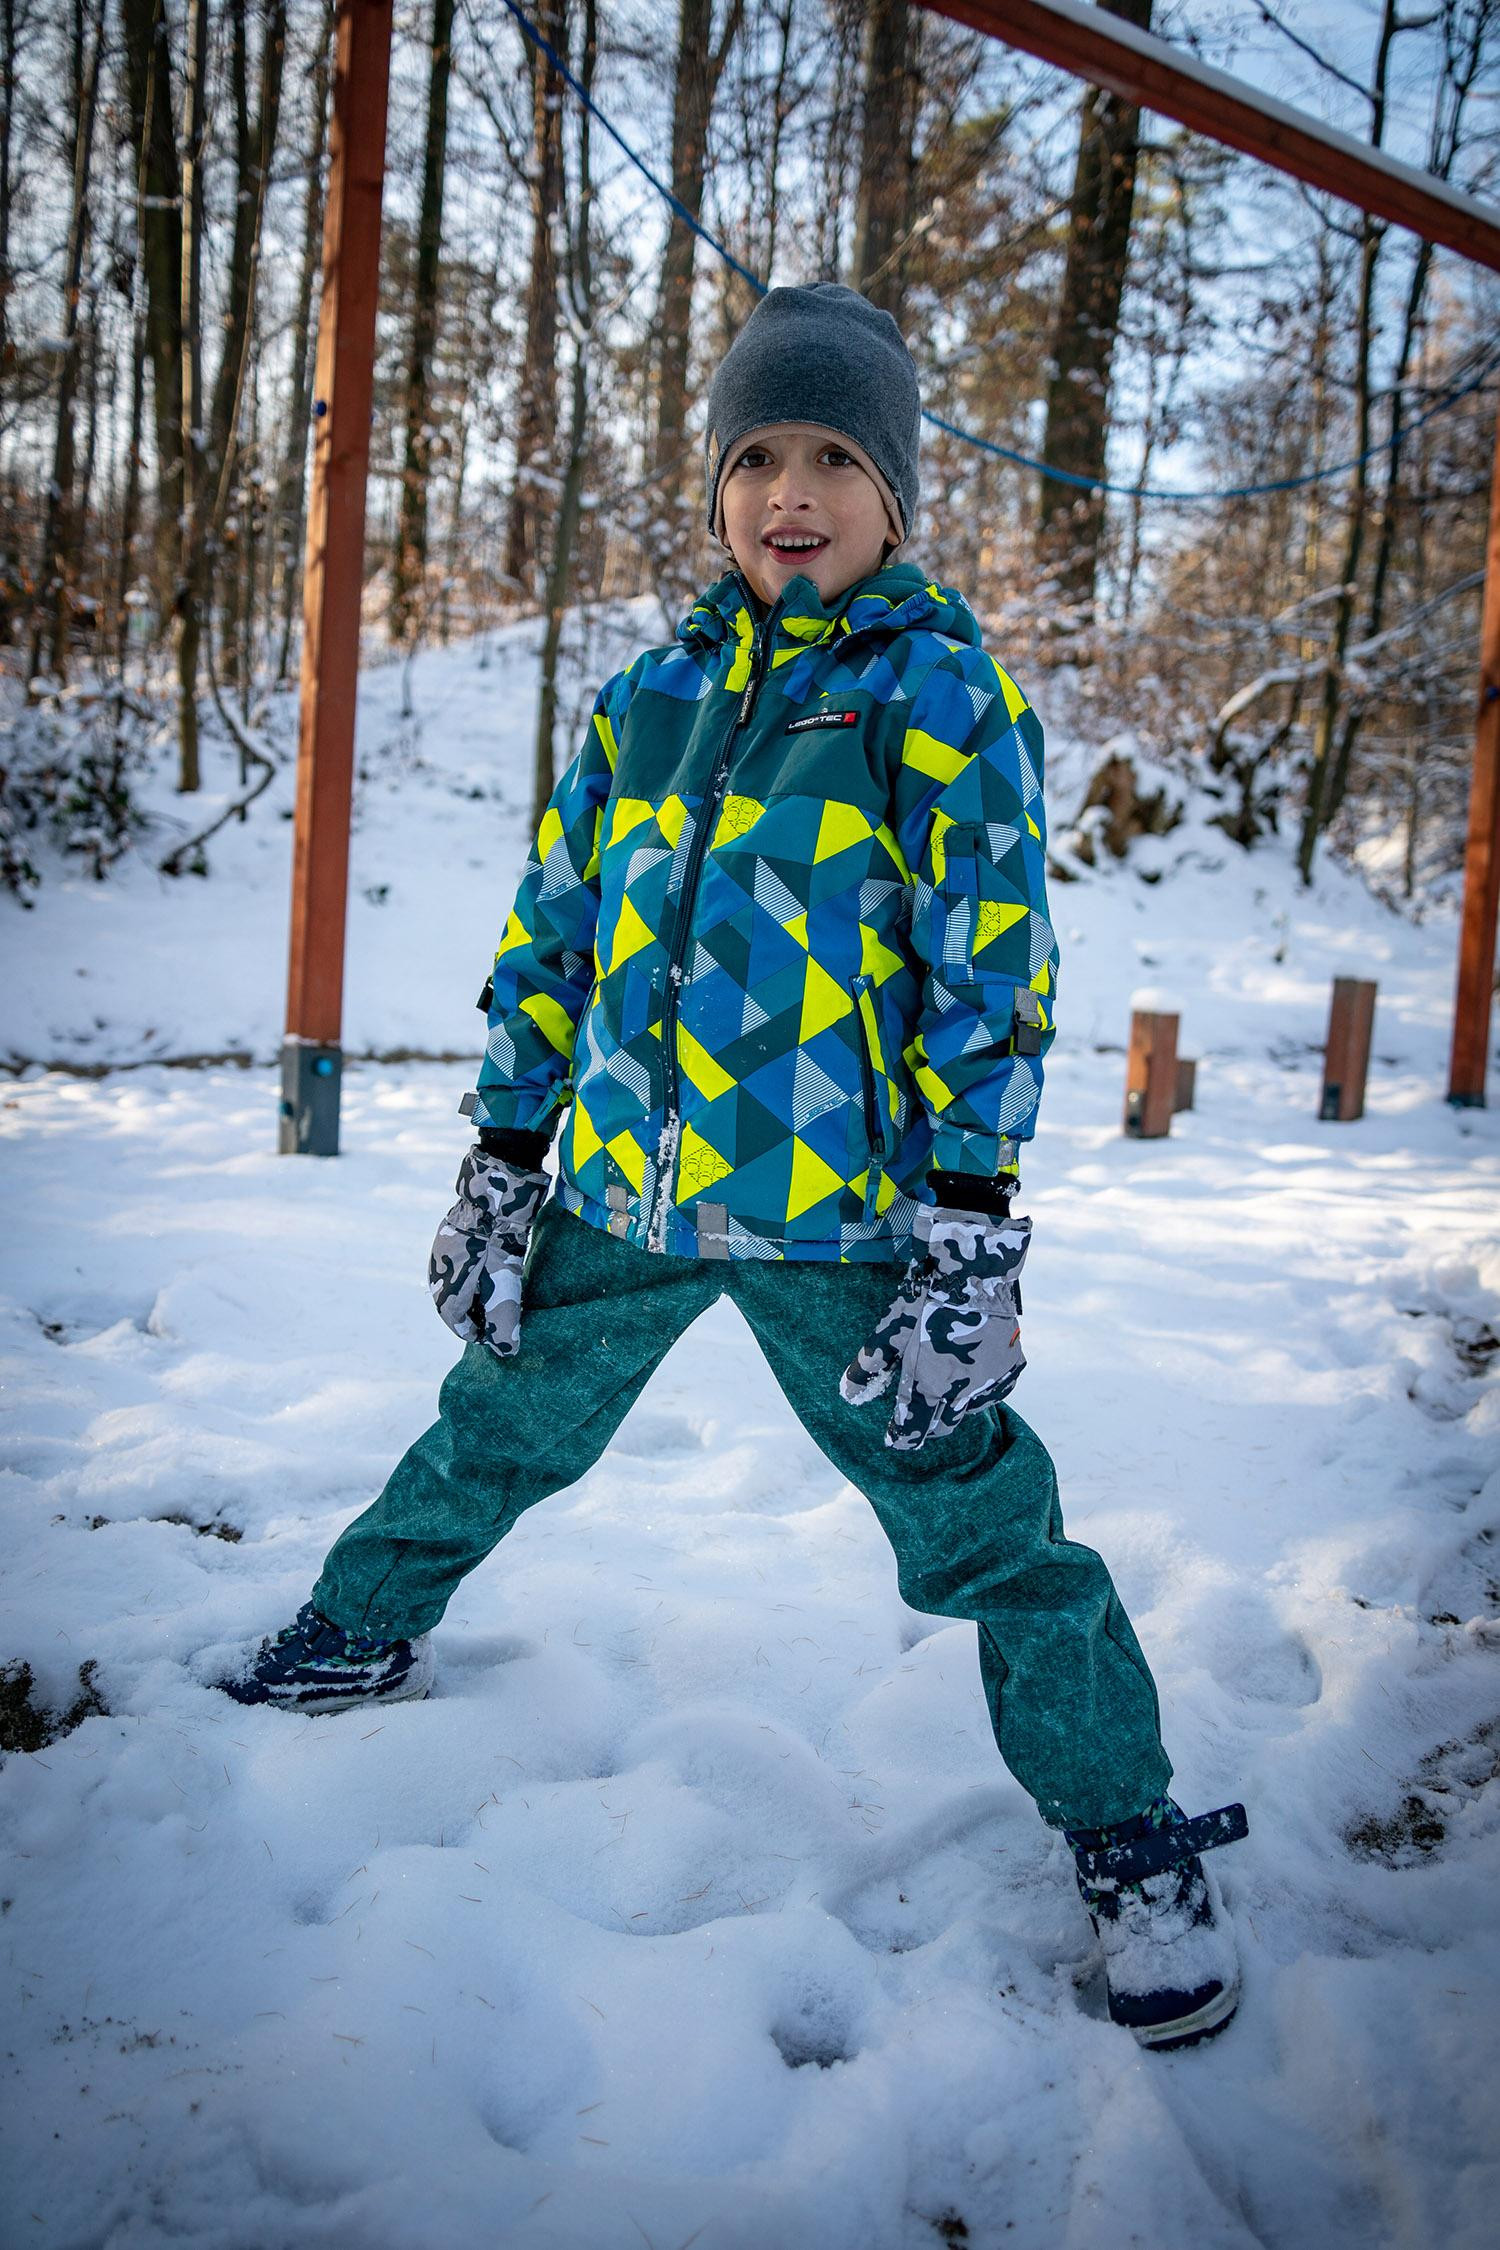 CHILDREN'S SOFTSHELL TROUSERS (YETI) - TURQUOISE SNOWFLAKES (PENGUINS)